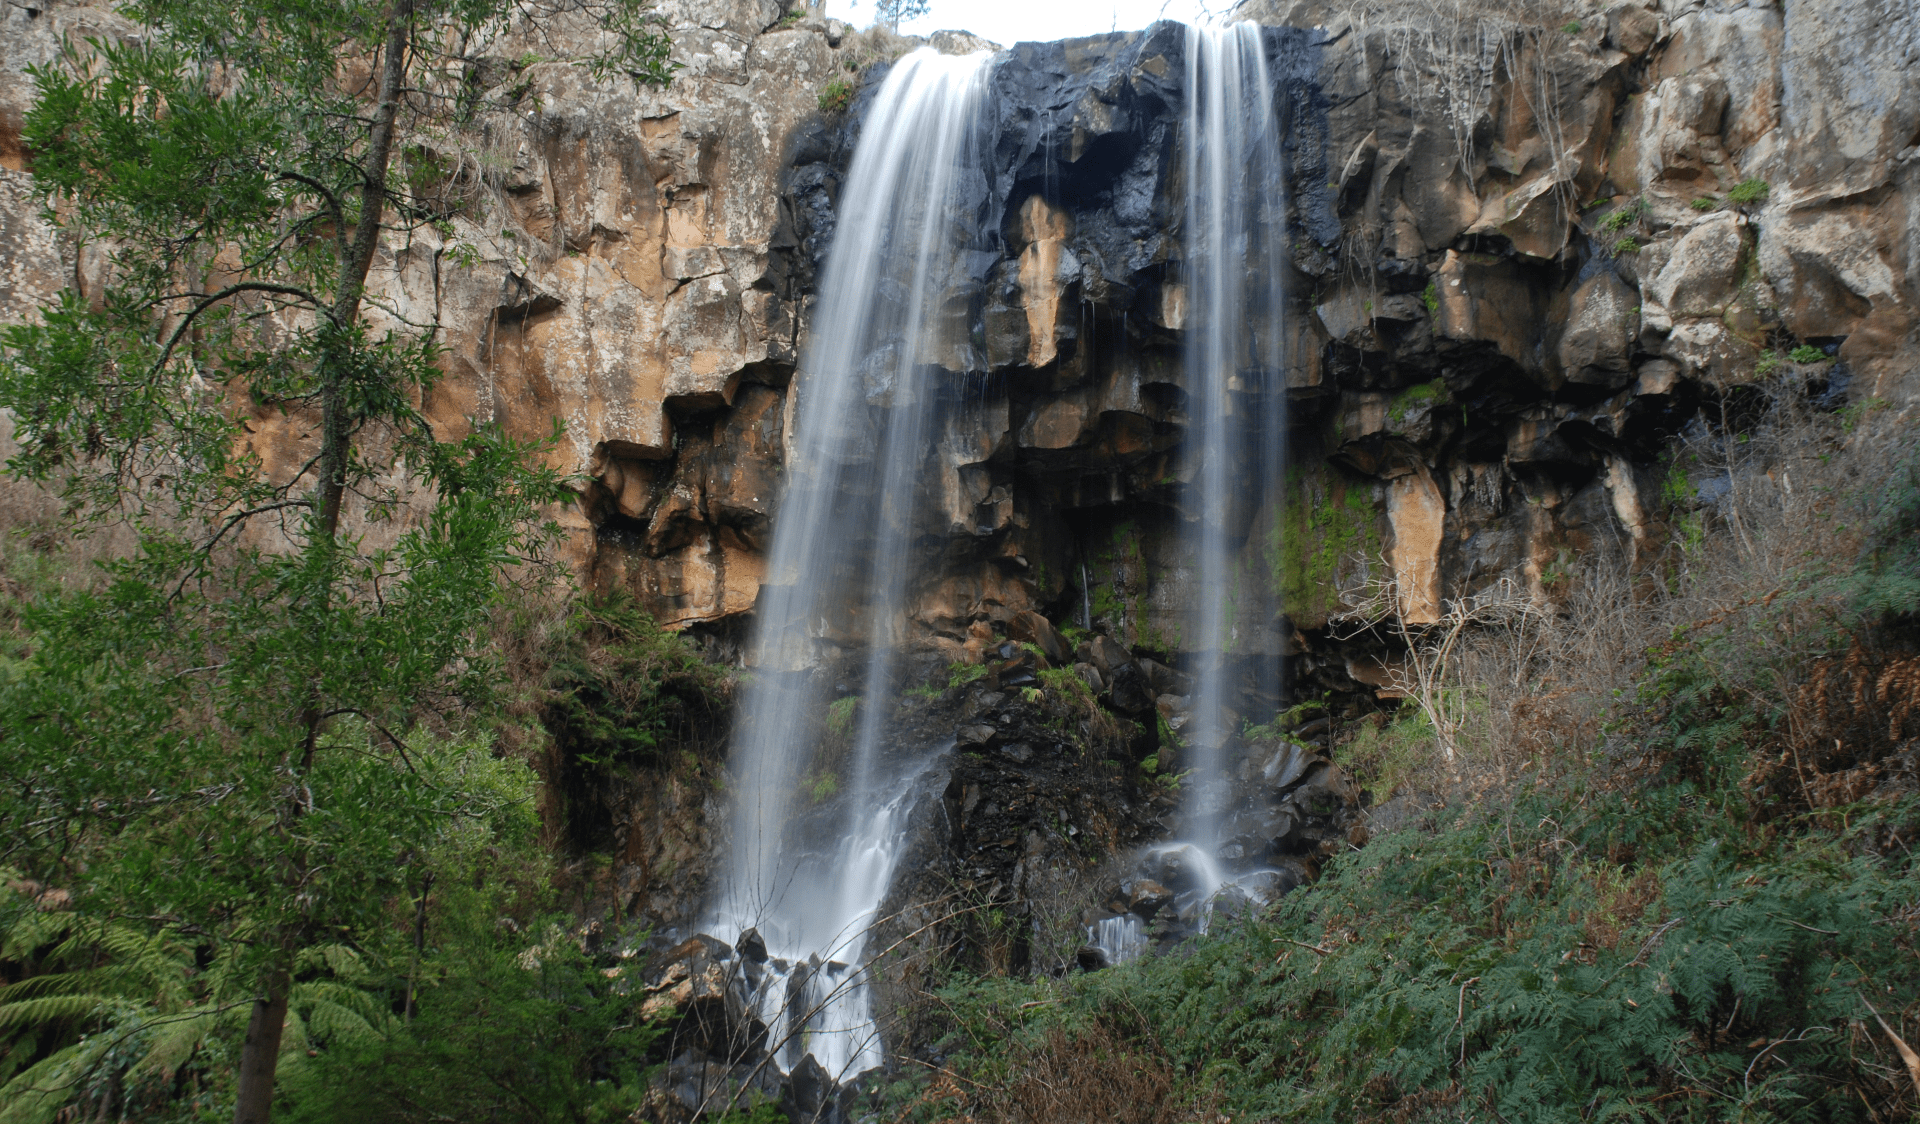 View of Sailors falls from the lower viewing area in Hepburn Regional Park